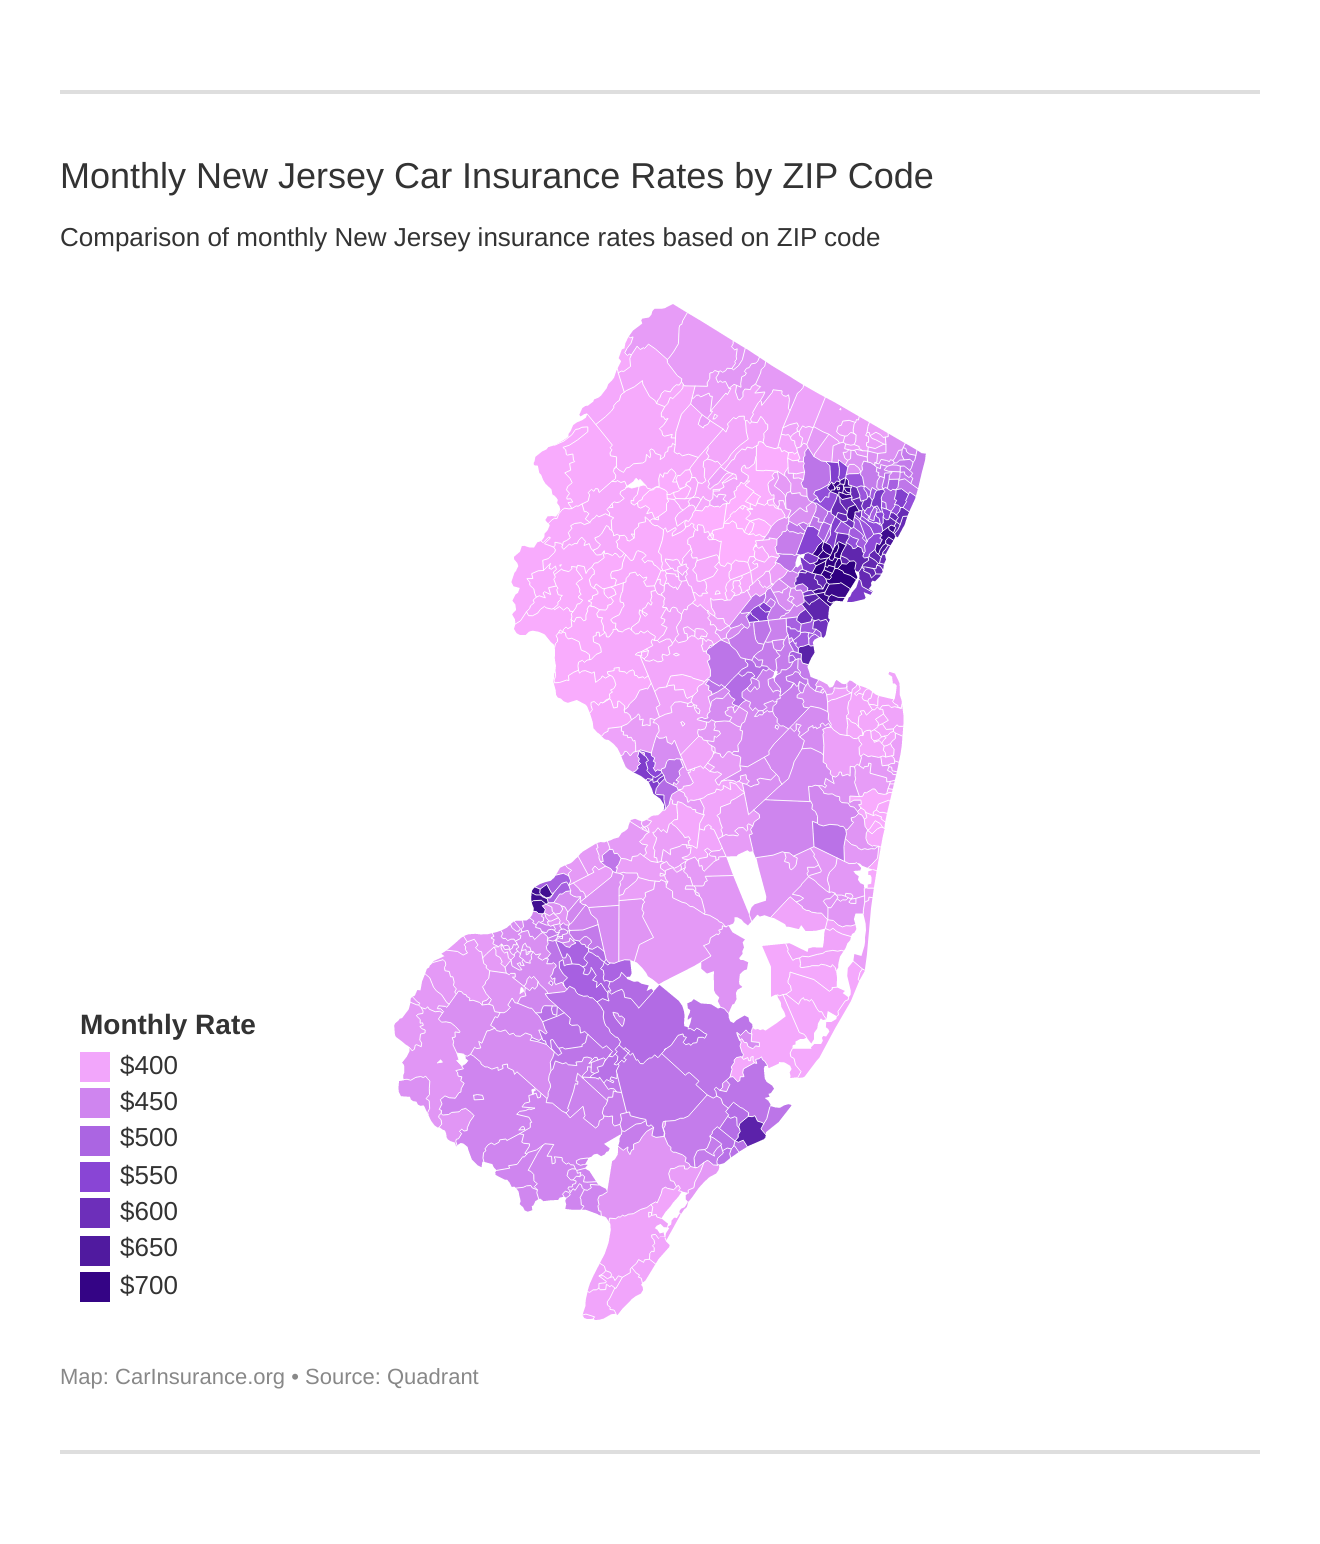 Monthly New Jersey Car Insurance Rates by ZIP Code